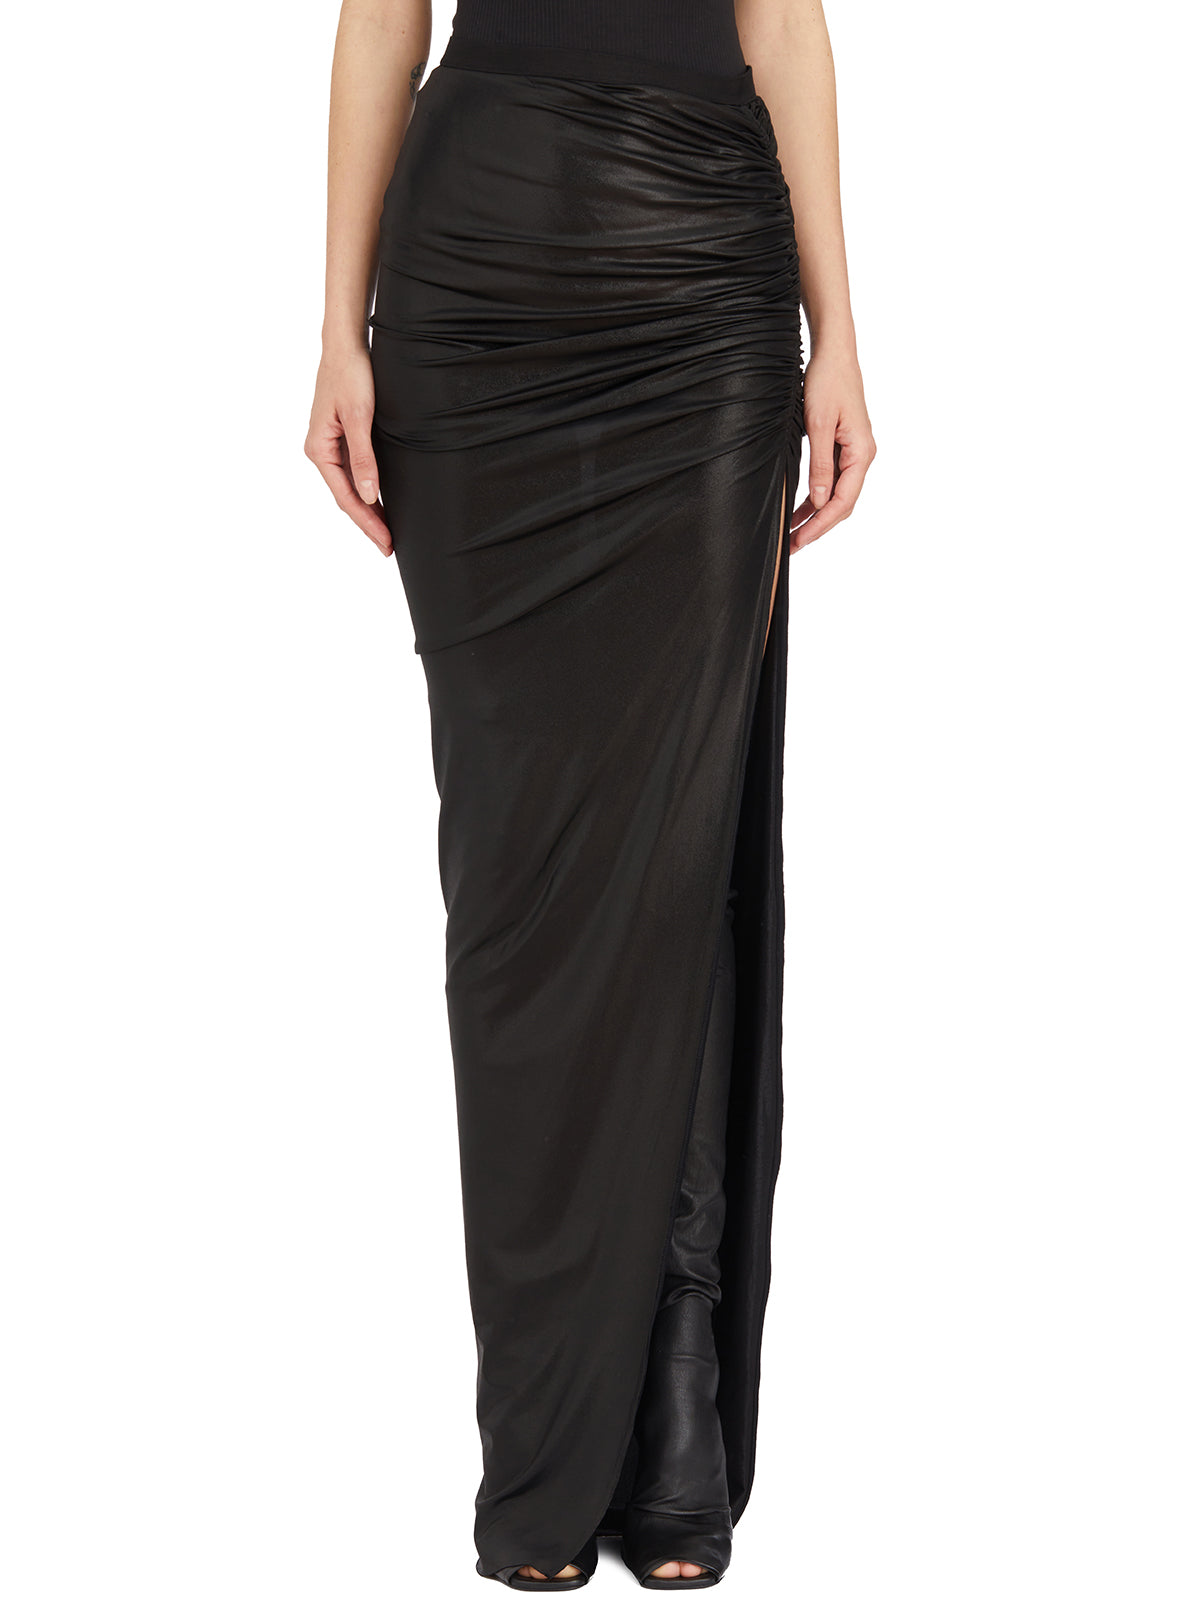 RICKOWENSLILIES Long Black Skirt with Draping and Stretch Fabric for Women